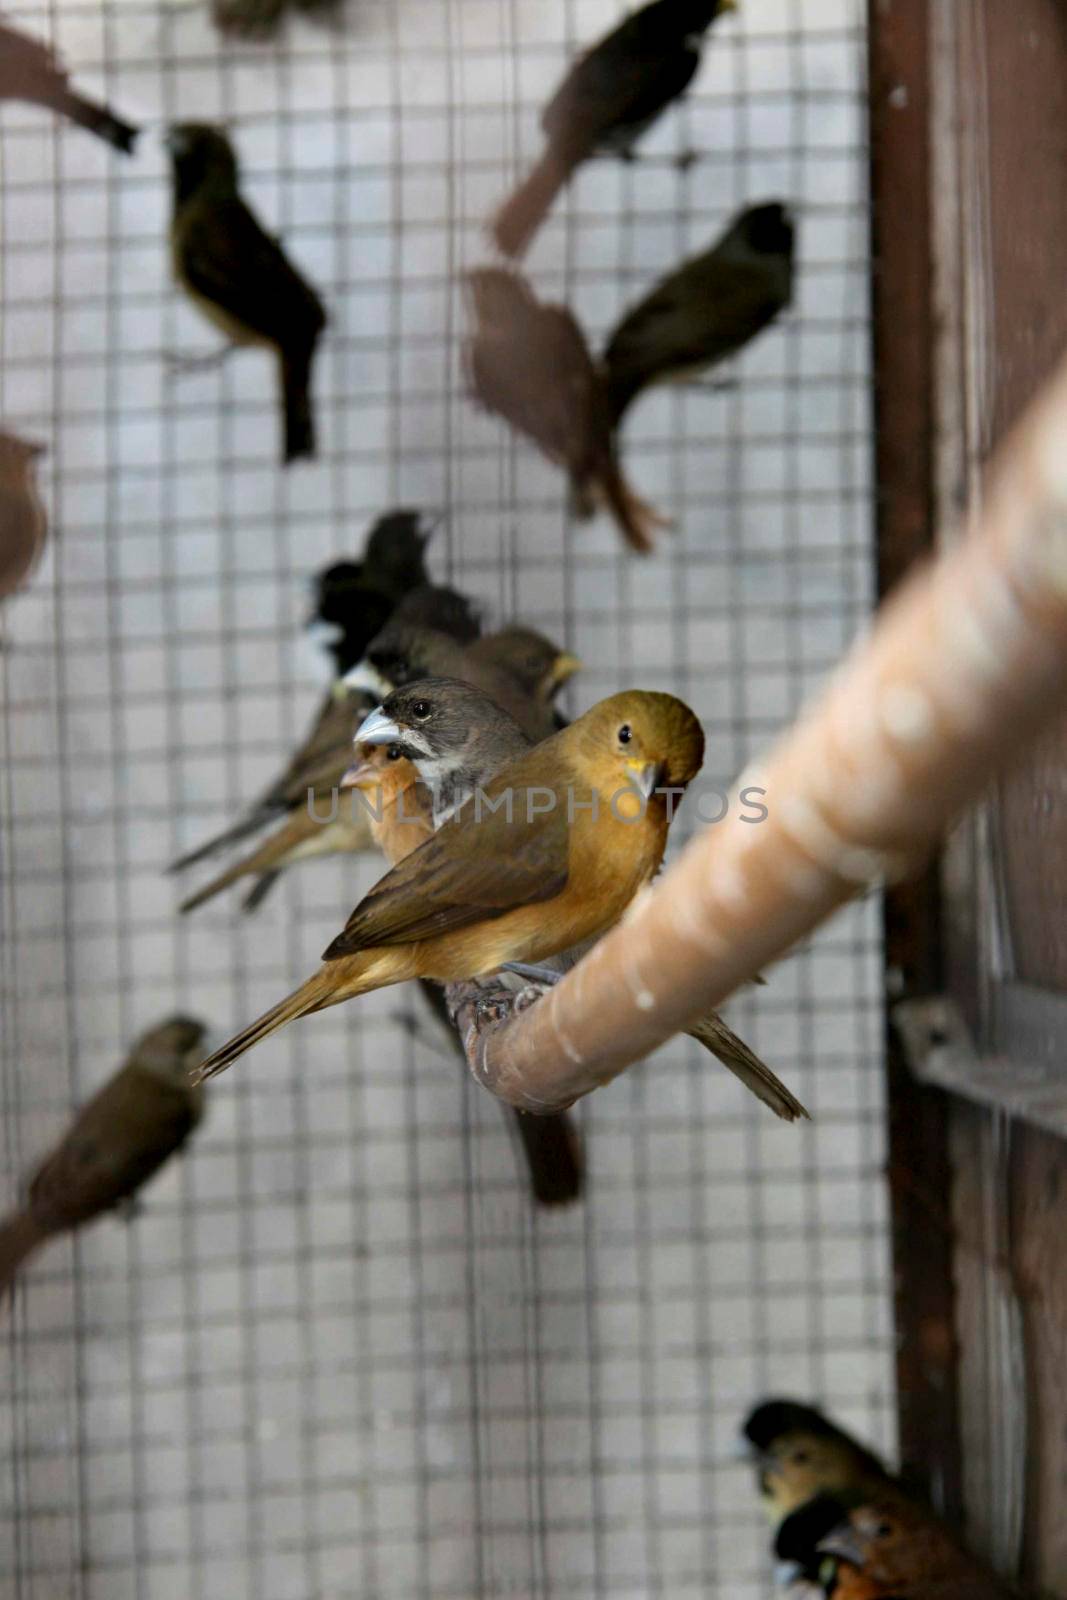 eunapolis, bahia / brazil - february 18, 2008: wild birds seized by Ibama are seen during treatment in the city of Eunapolis.